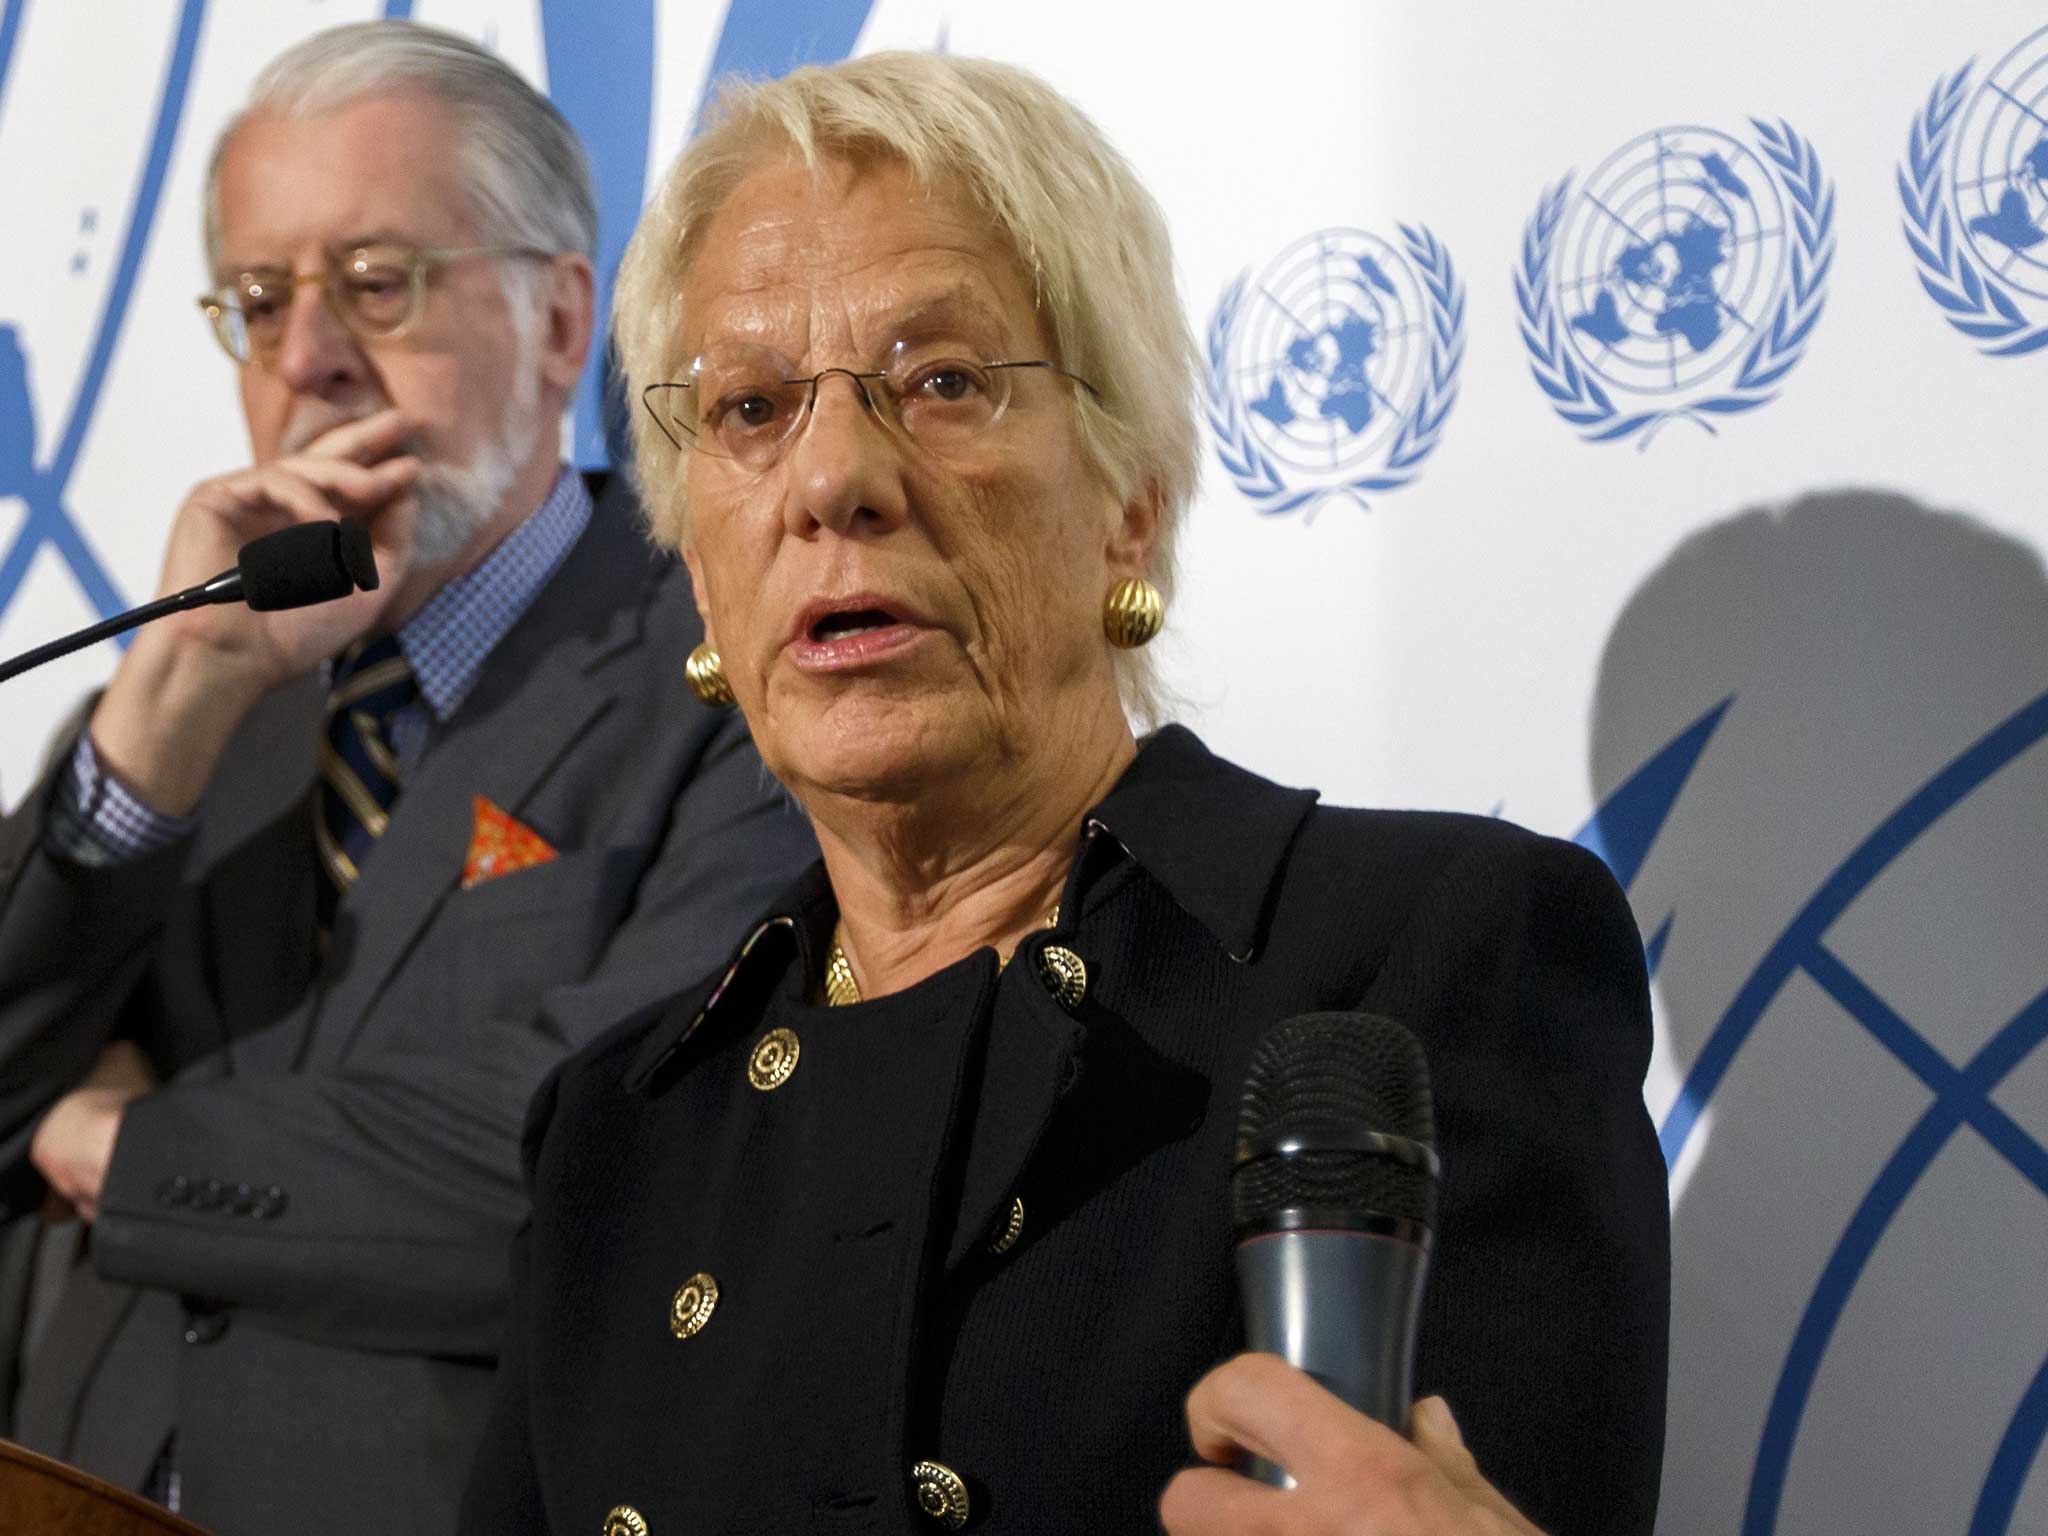 Carla Del Ponte said that testimony gathered from casualties and medical staff indicated that the nerve agent sarin gas was used by rebel fighters